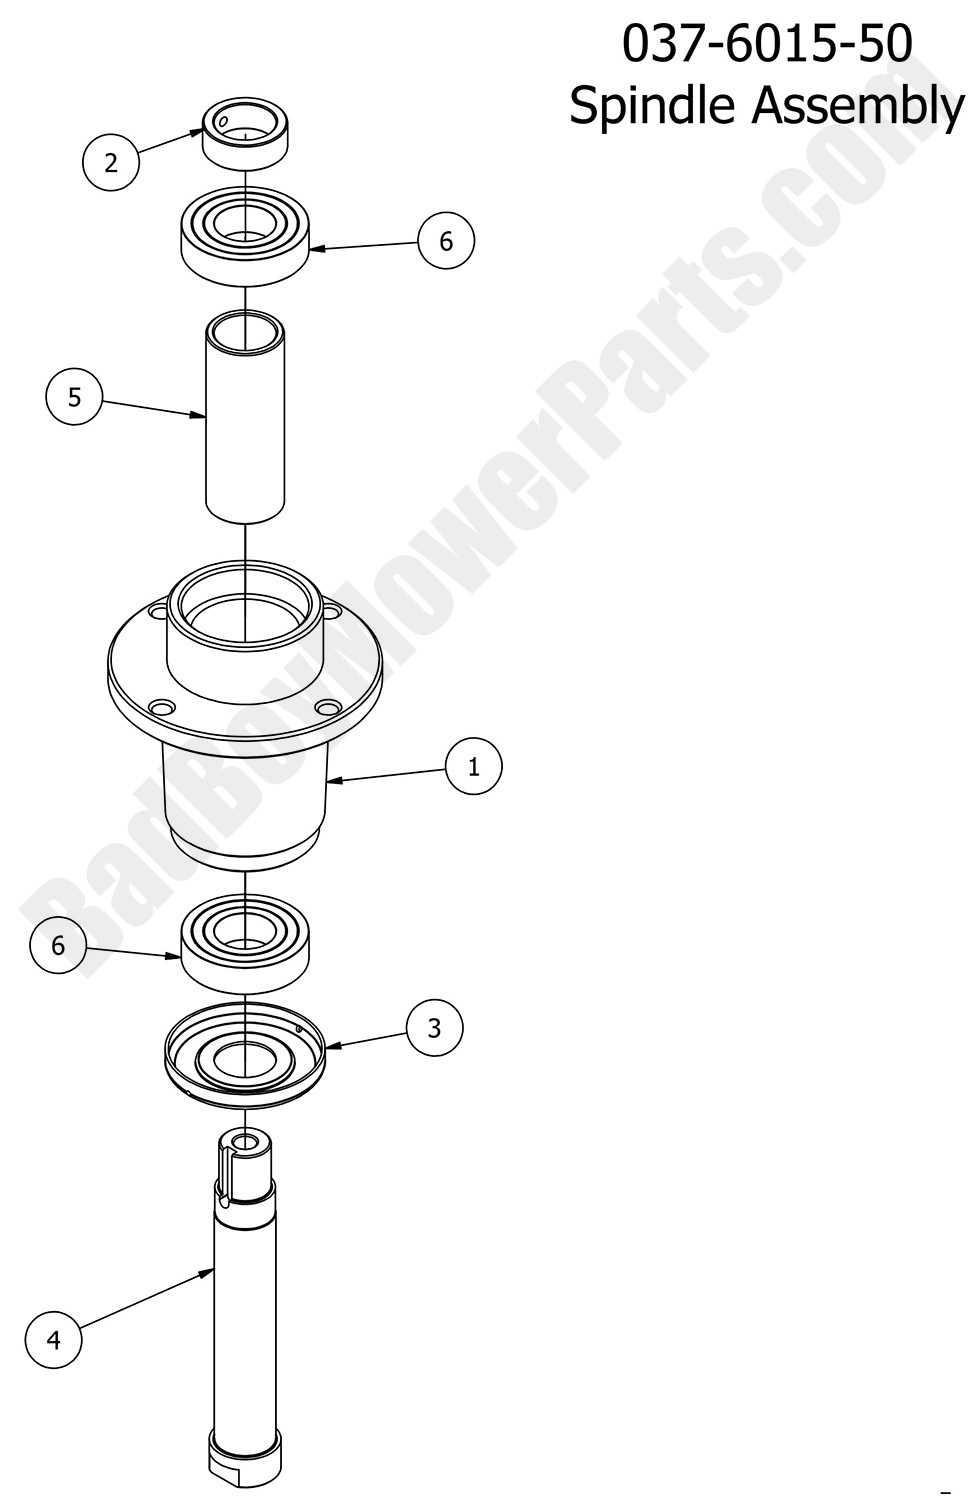 2016 Compact Outlaw Spindle Assembly